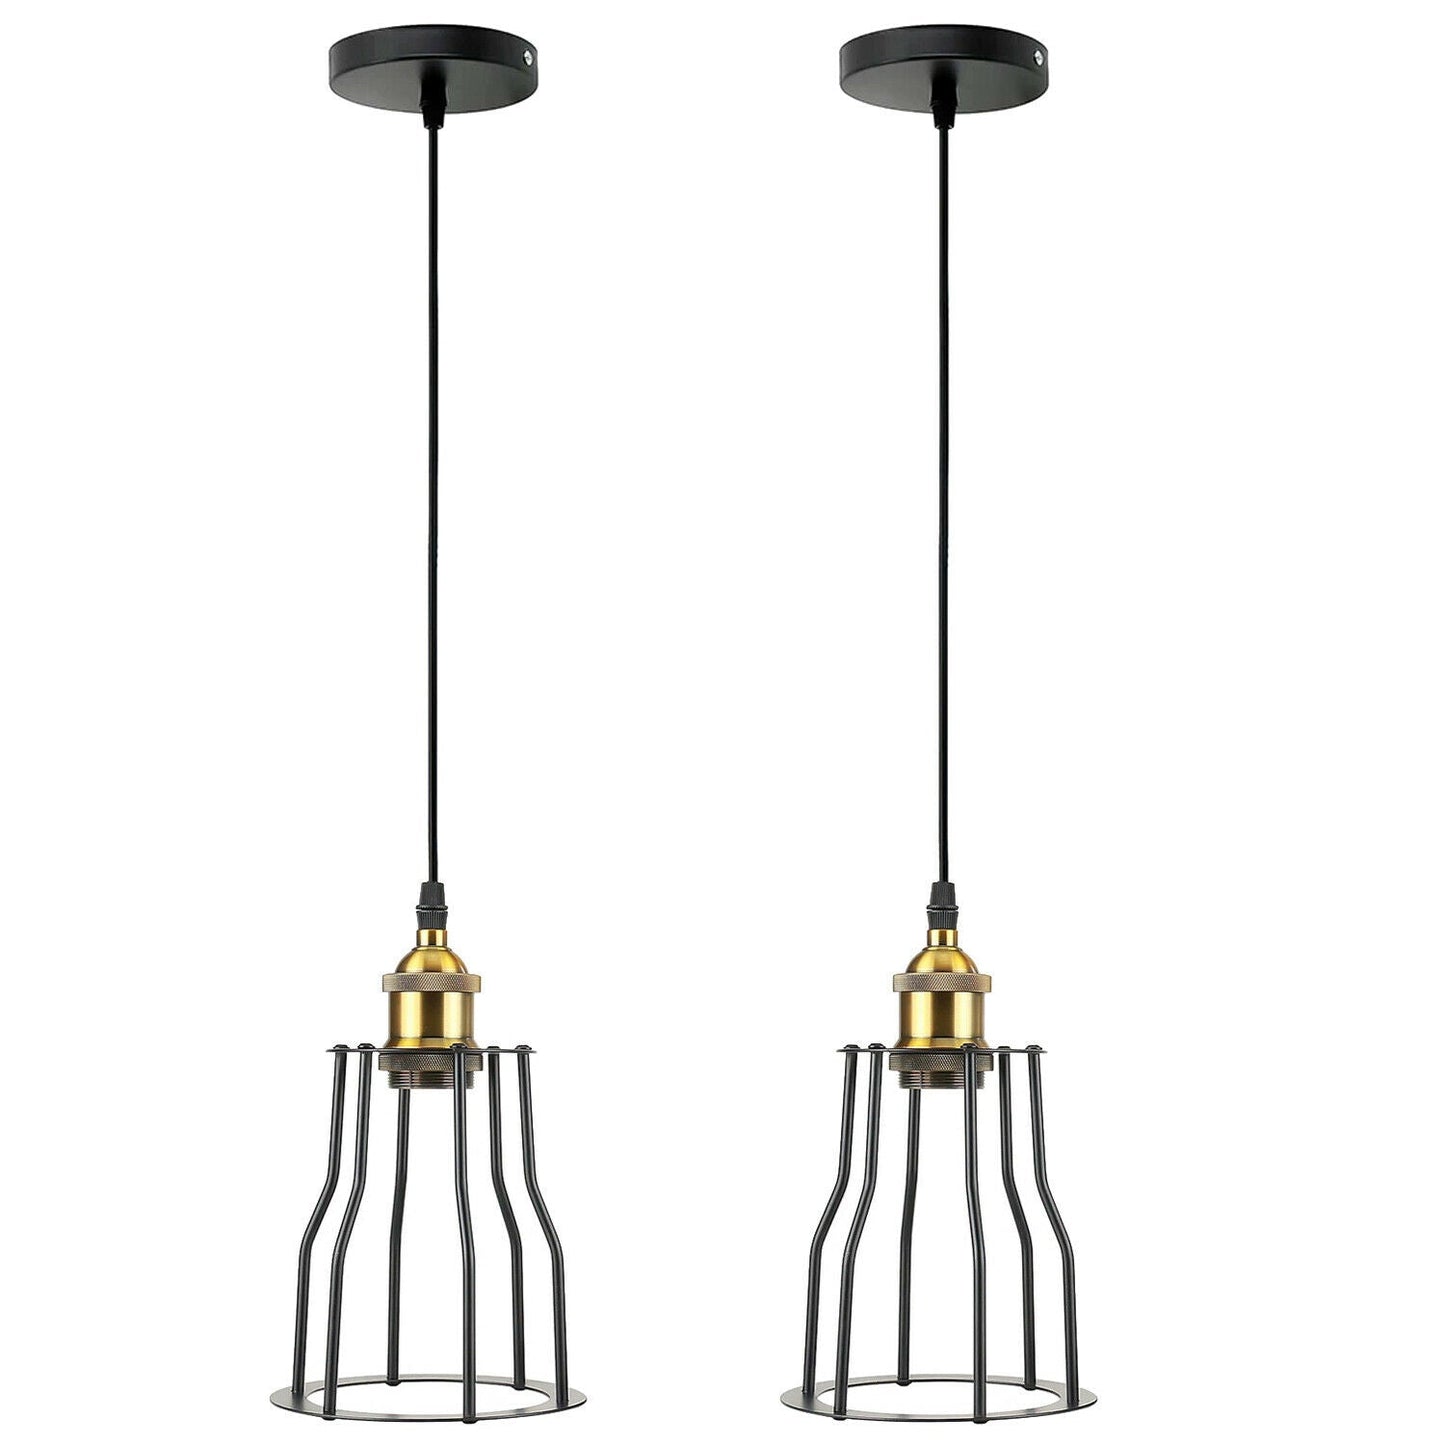 Modern 2-Wire Cage Ceiling Pendant Light